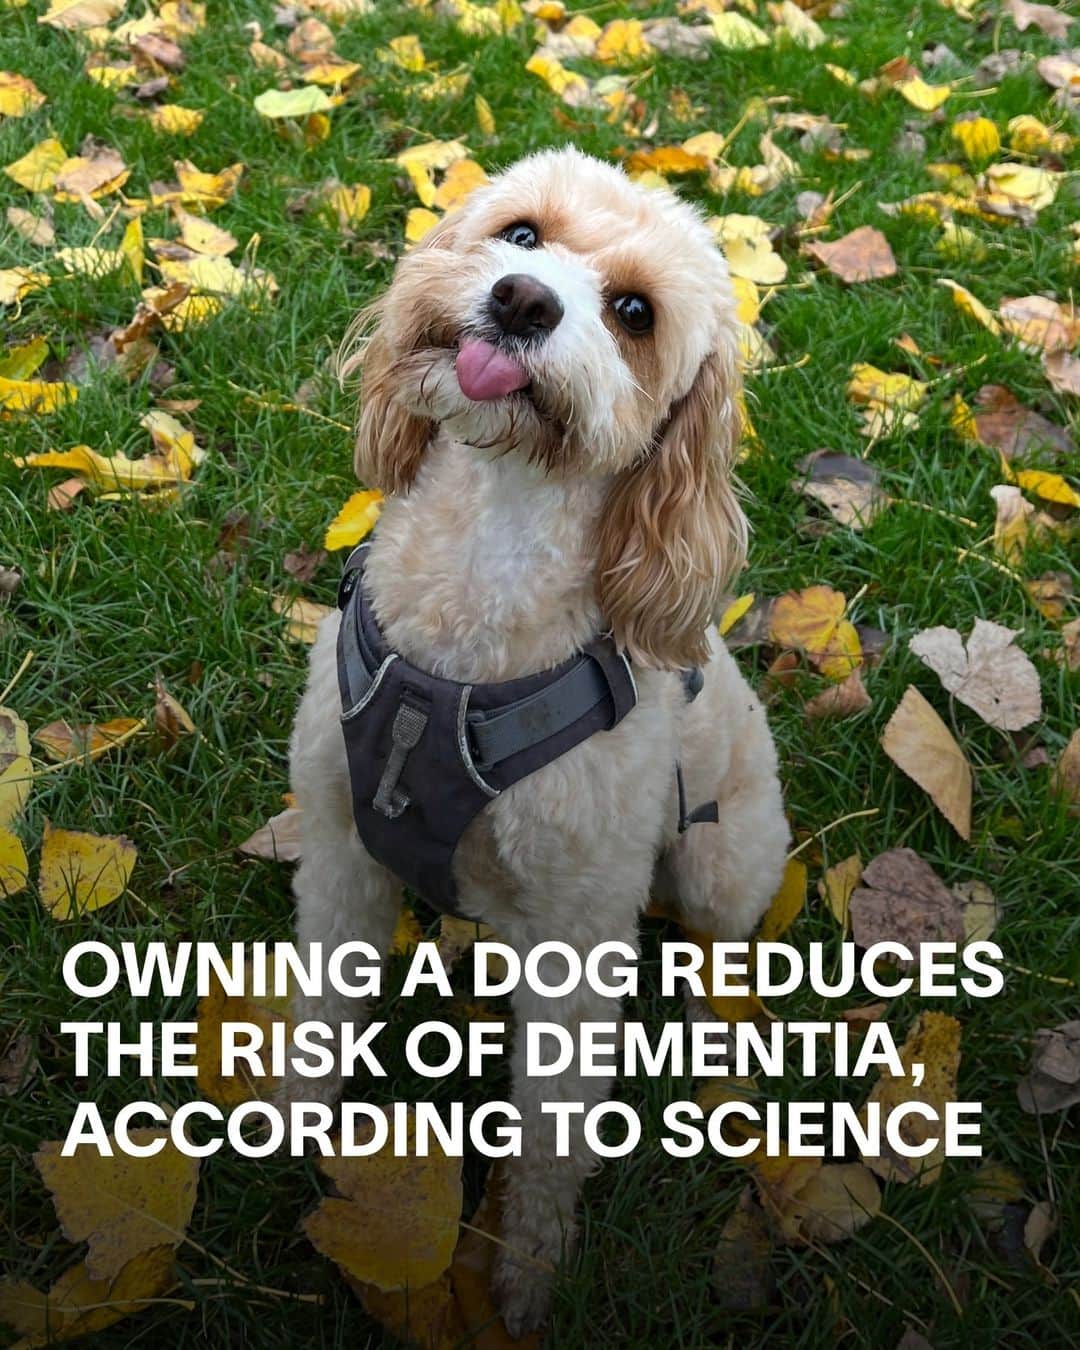 VICEのインスタグラム：「In yet another win for dogs, according to a new study, owning one could significantly reduce your likelihood of developing dementia. ⁠ ⁠ A study of over 11,000 individuals aged between 65 and 84 found that current dog owners have a 40 percent lower chance of suffering from disabling dementia compared to those who'd previously owned dogs or never owned them. ⁠ ⁠ The reasoning: regular dog walks mean more exercise and more opportunities for social interaction, which is considered to have a "suppressive effect" on the development of dementia. ⁠ ⁠ Unfortunately, the same study found that owning a cat makes almost no difference at all :(」